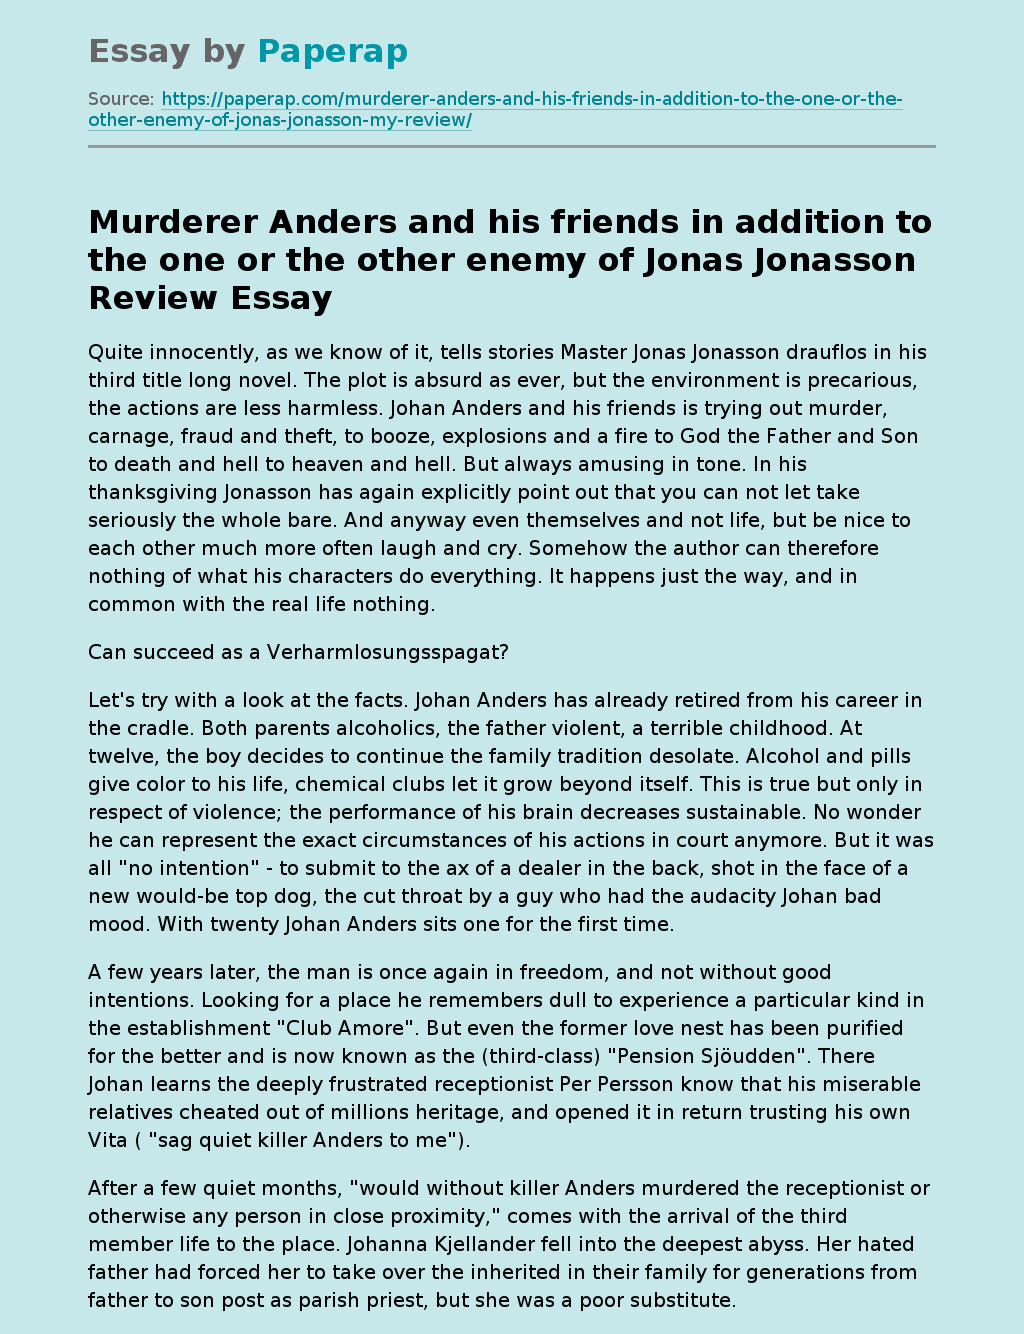 "Murderer Anders And His Friends In Addition To The One Or The Other Enemy" Be Jonas Jonasson